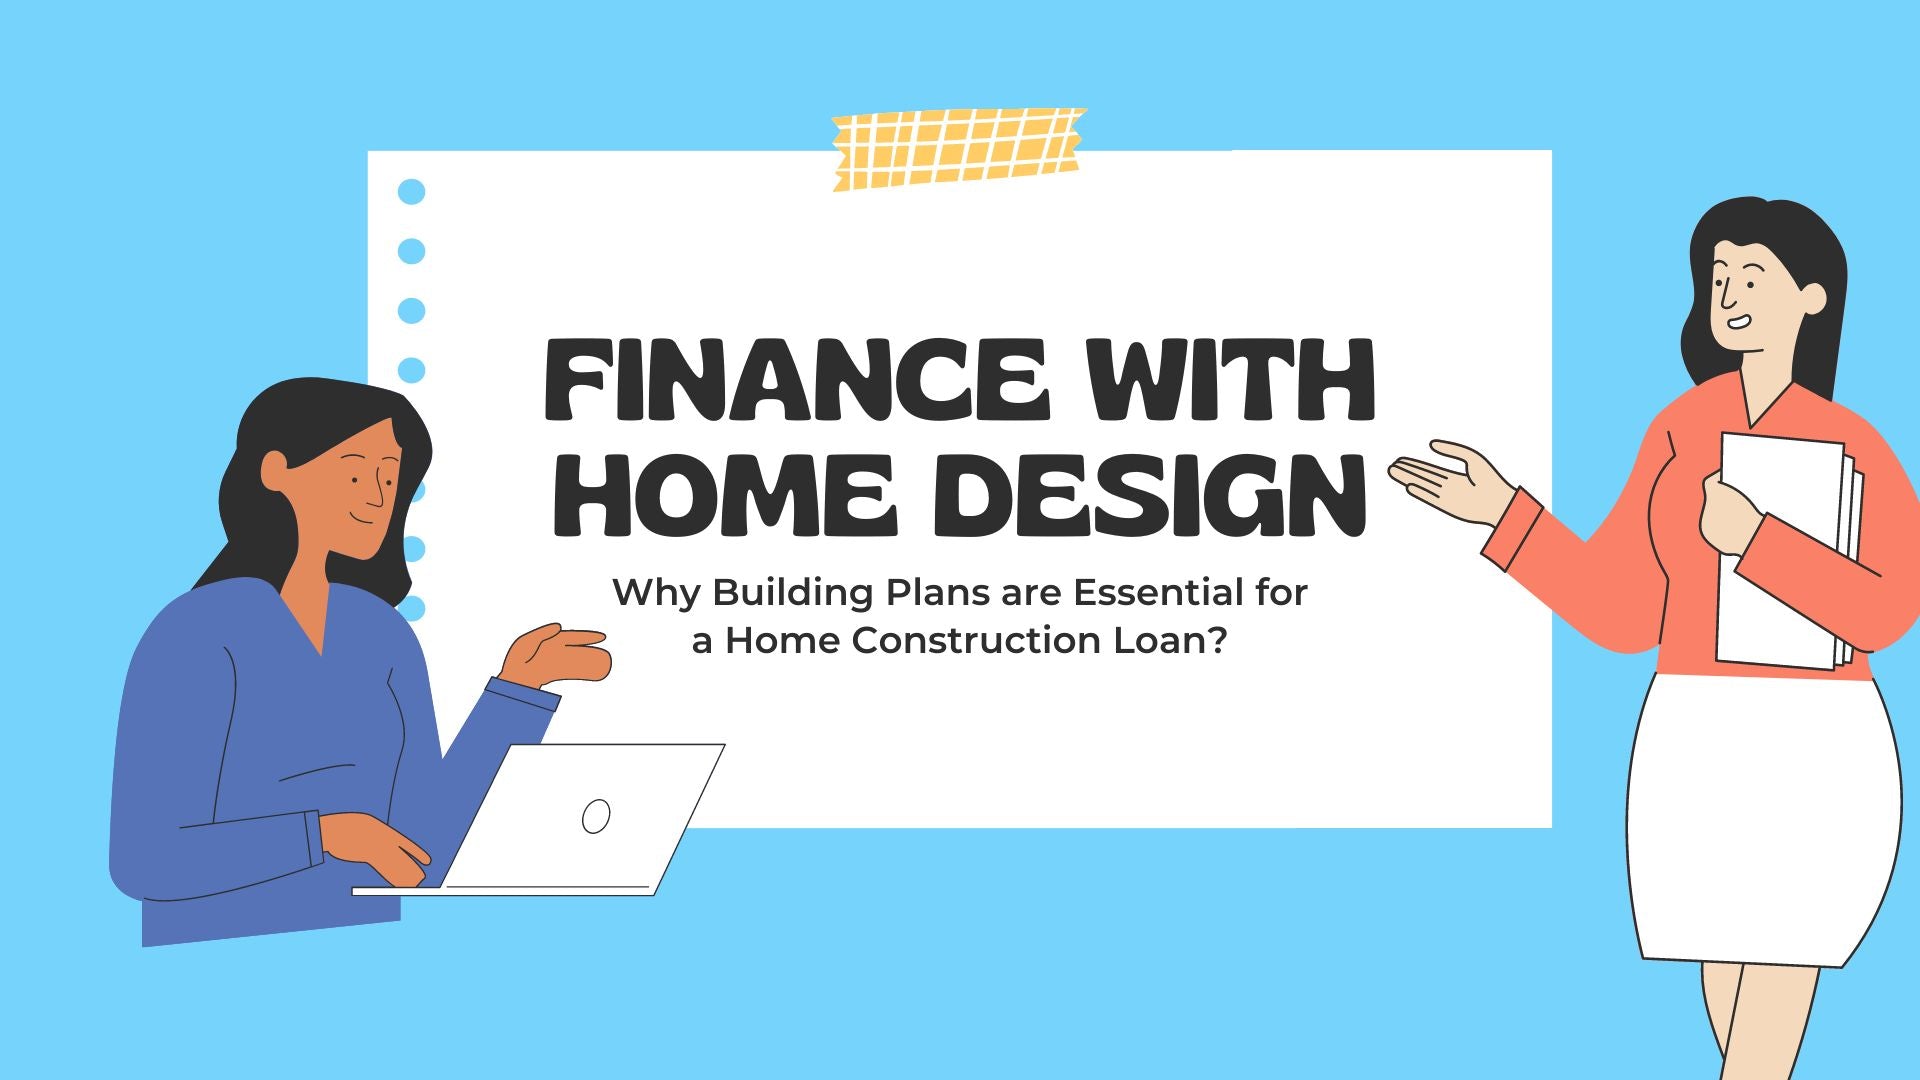 Why Building Plans are Essential for a Home Construction Loan